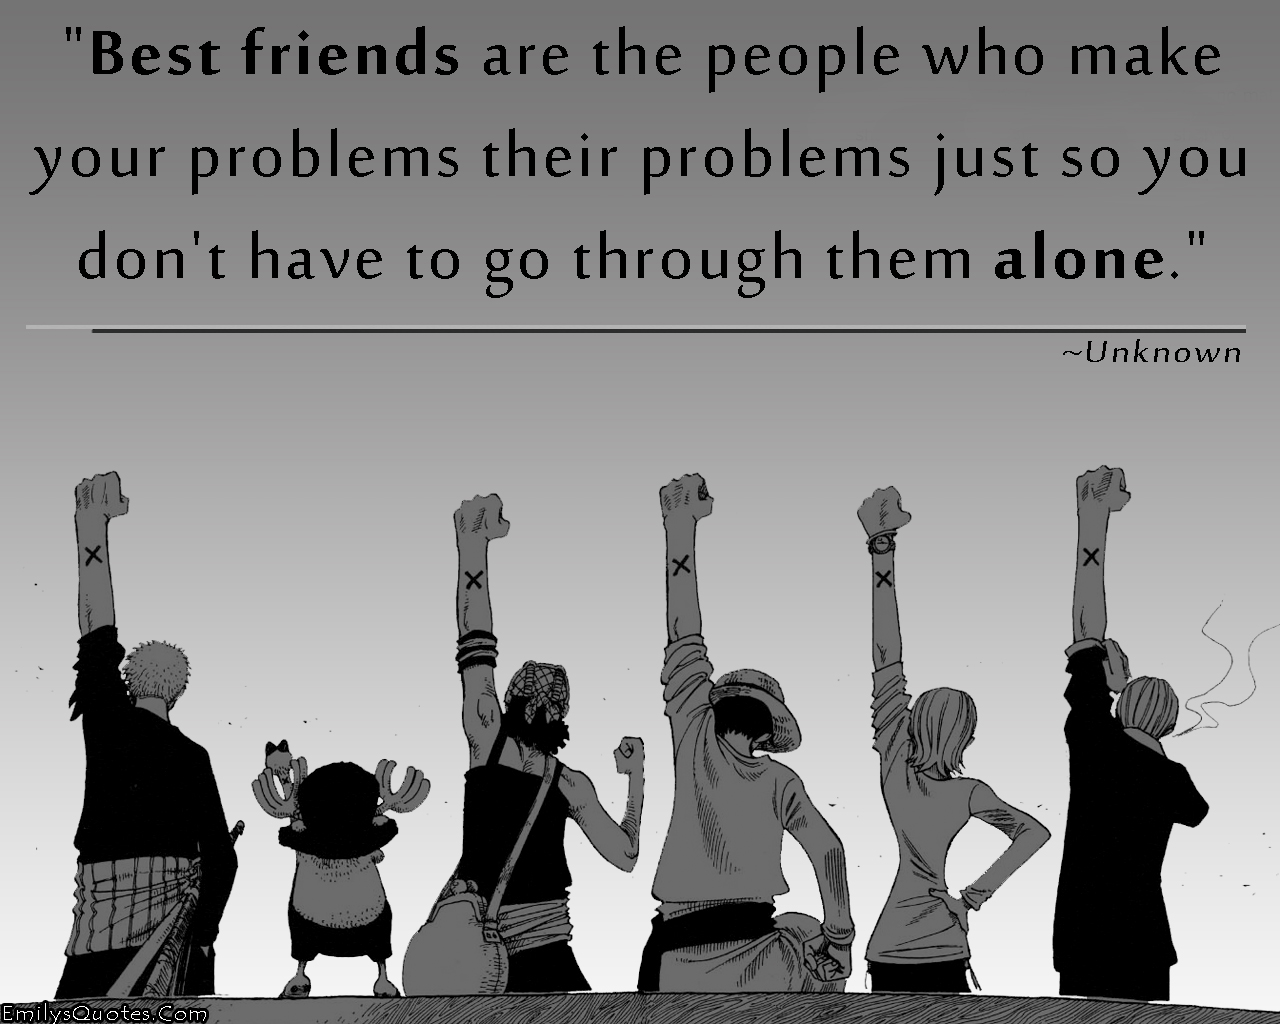 Best friends are the people who make your problems their problems just